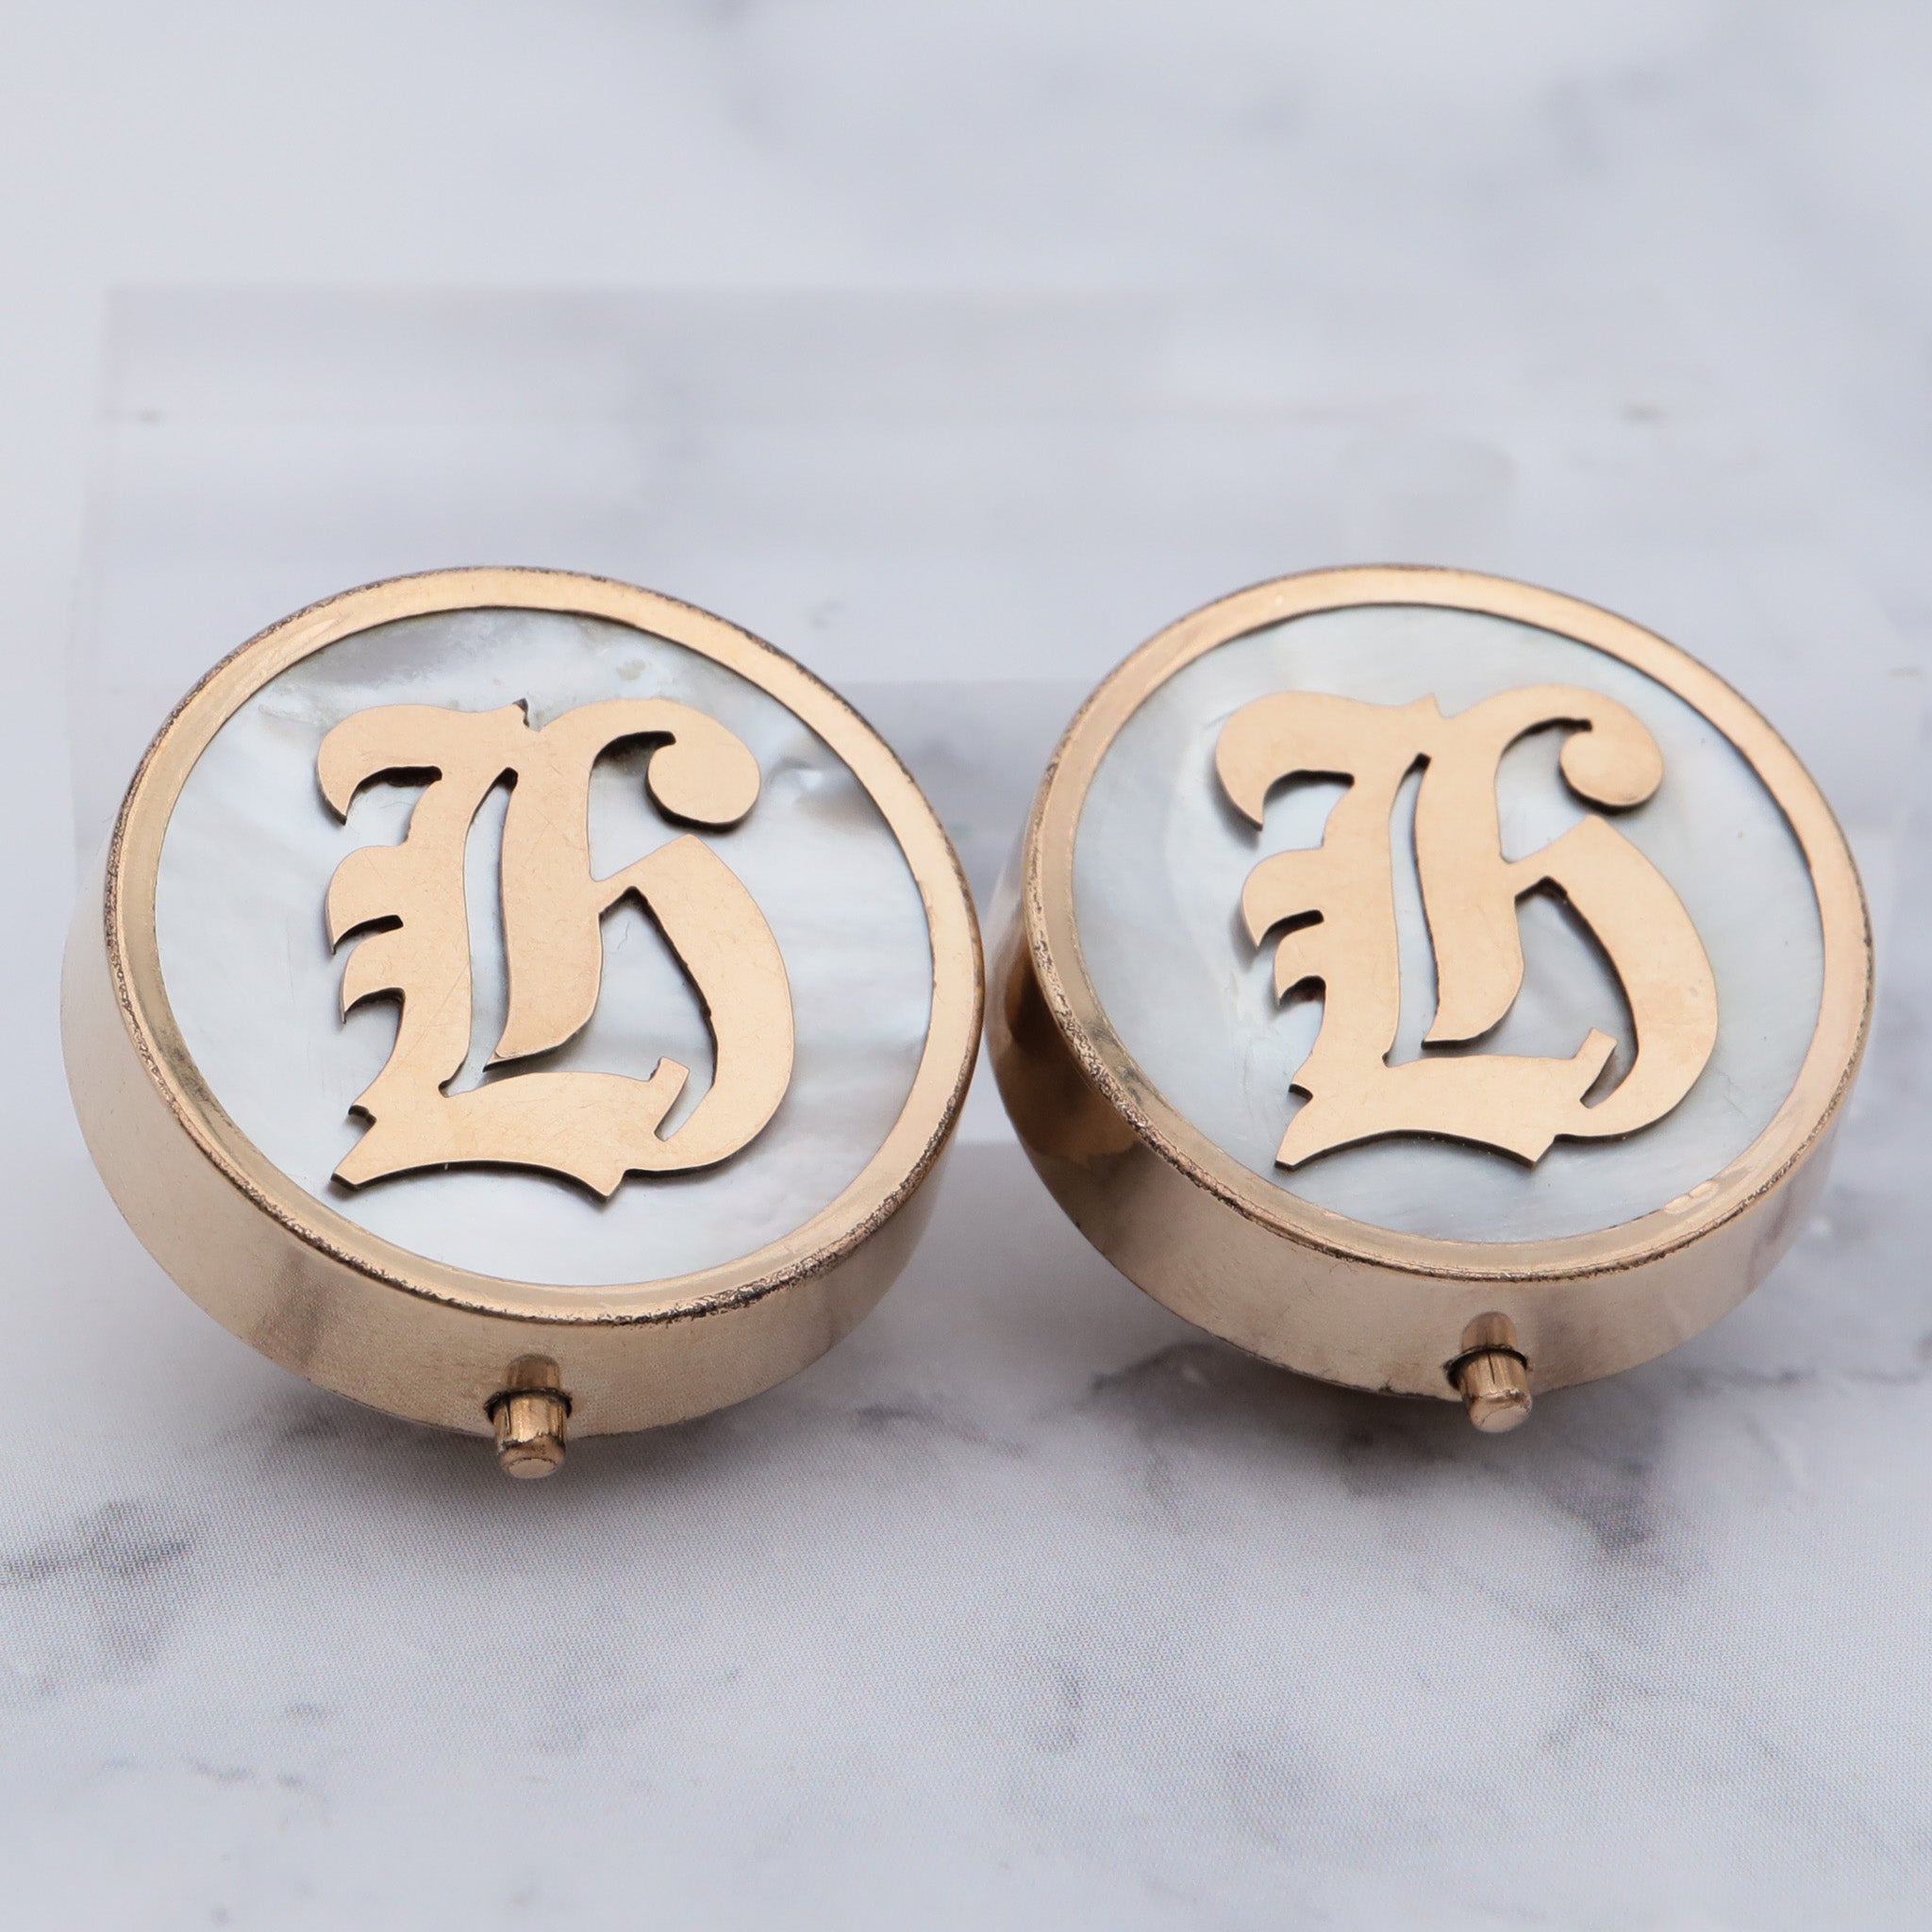 Antique late 1800’s gold-filled & mother of pearl monogrammed “K” cufflinks